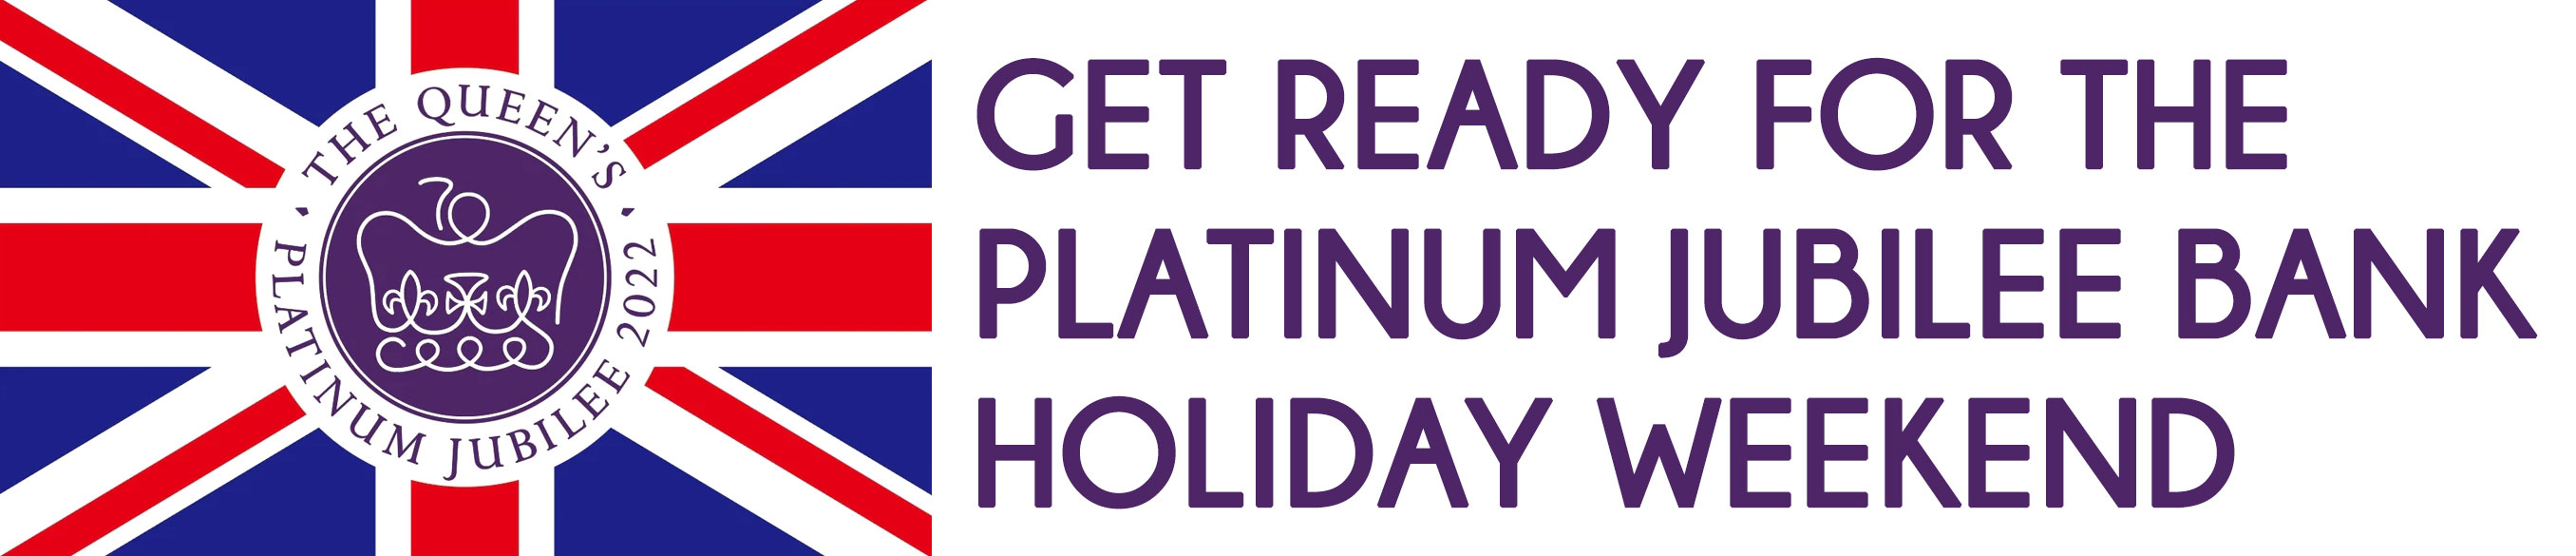 GET READY FOR THE PLATINUM JUBILEE BANK HOLIDAY WEEKEND